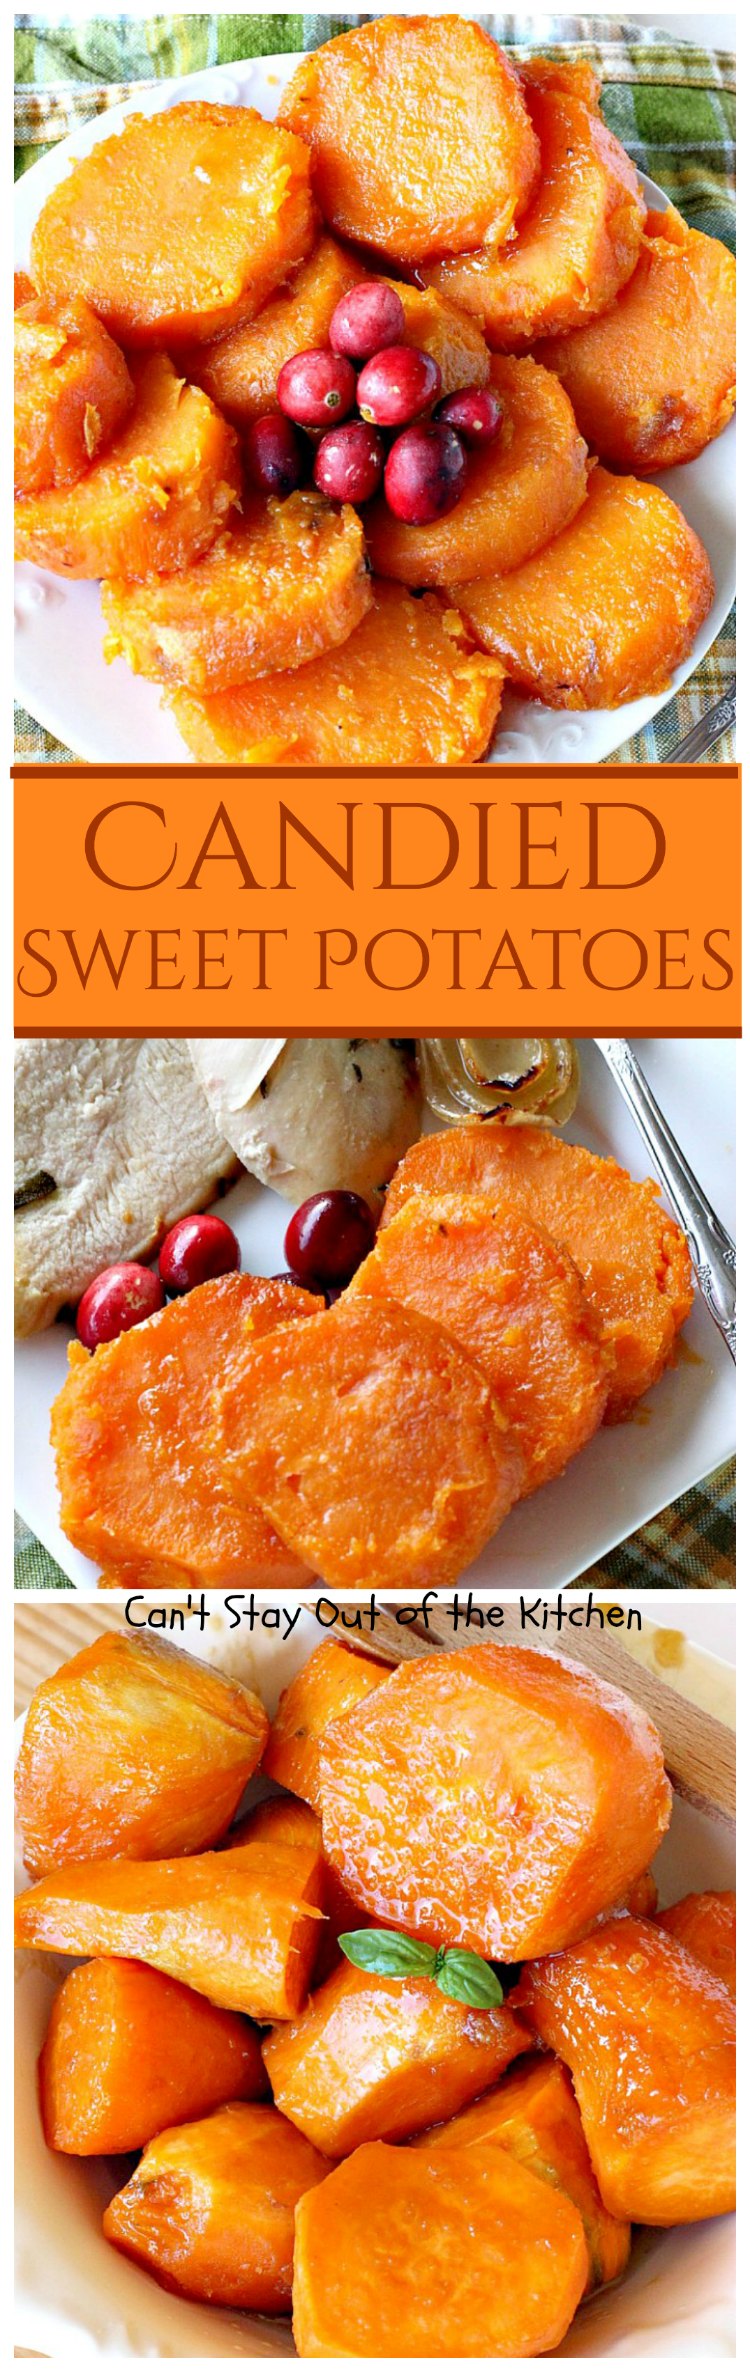 Candied Sweet Potatoes | Can't Stay Out of the Kitchen